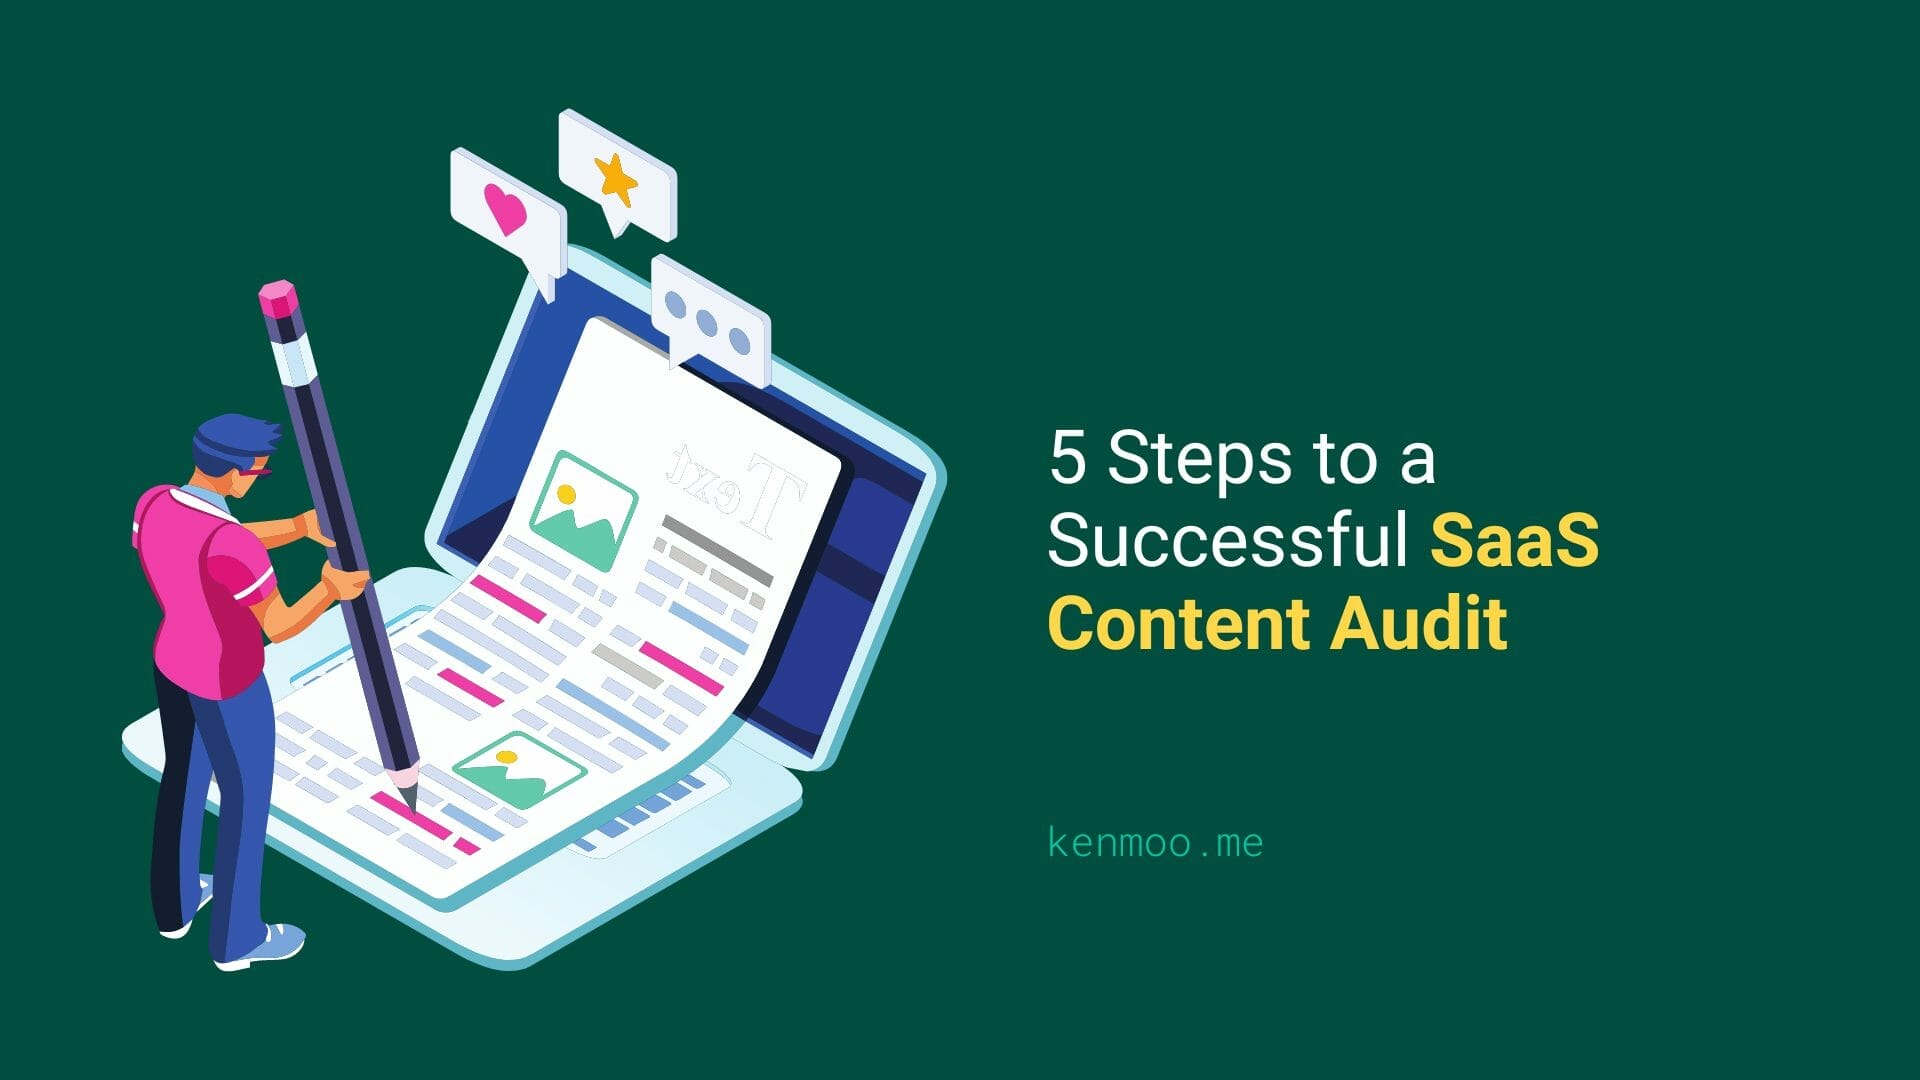 5 Steps to a Successful SaaS Content Audit